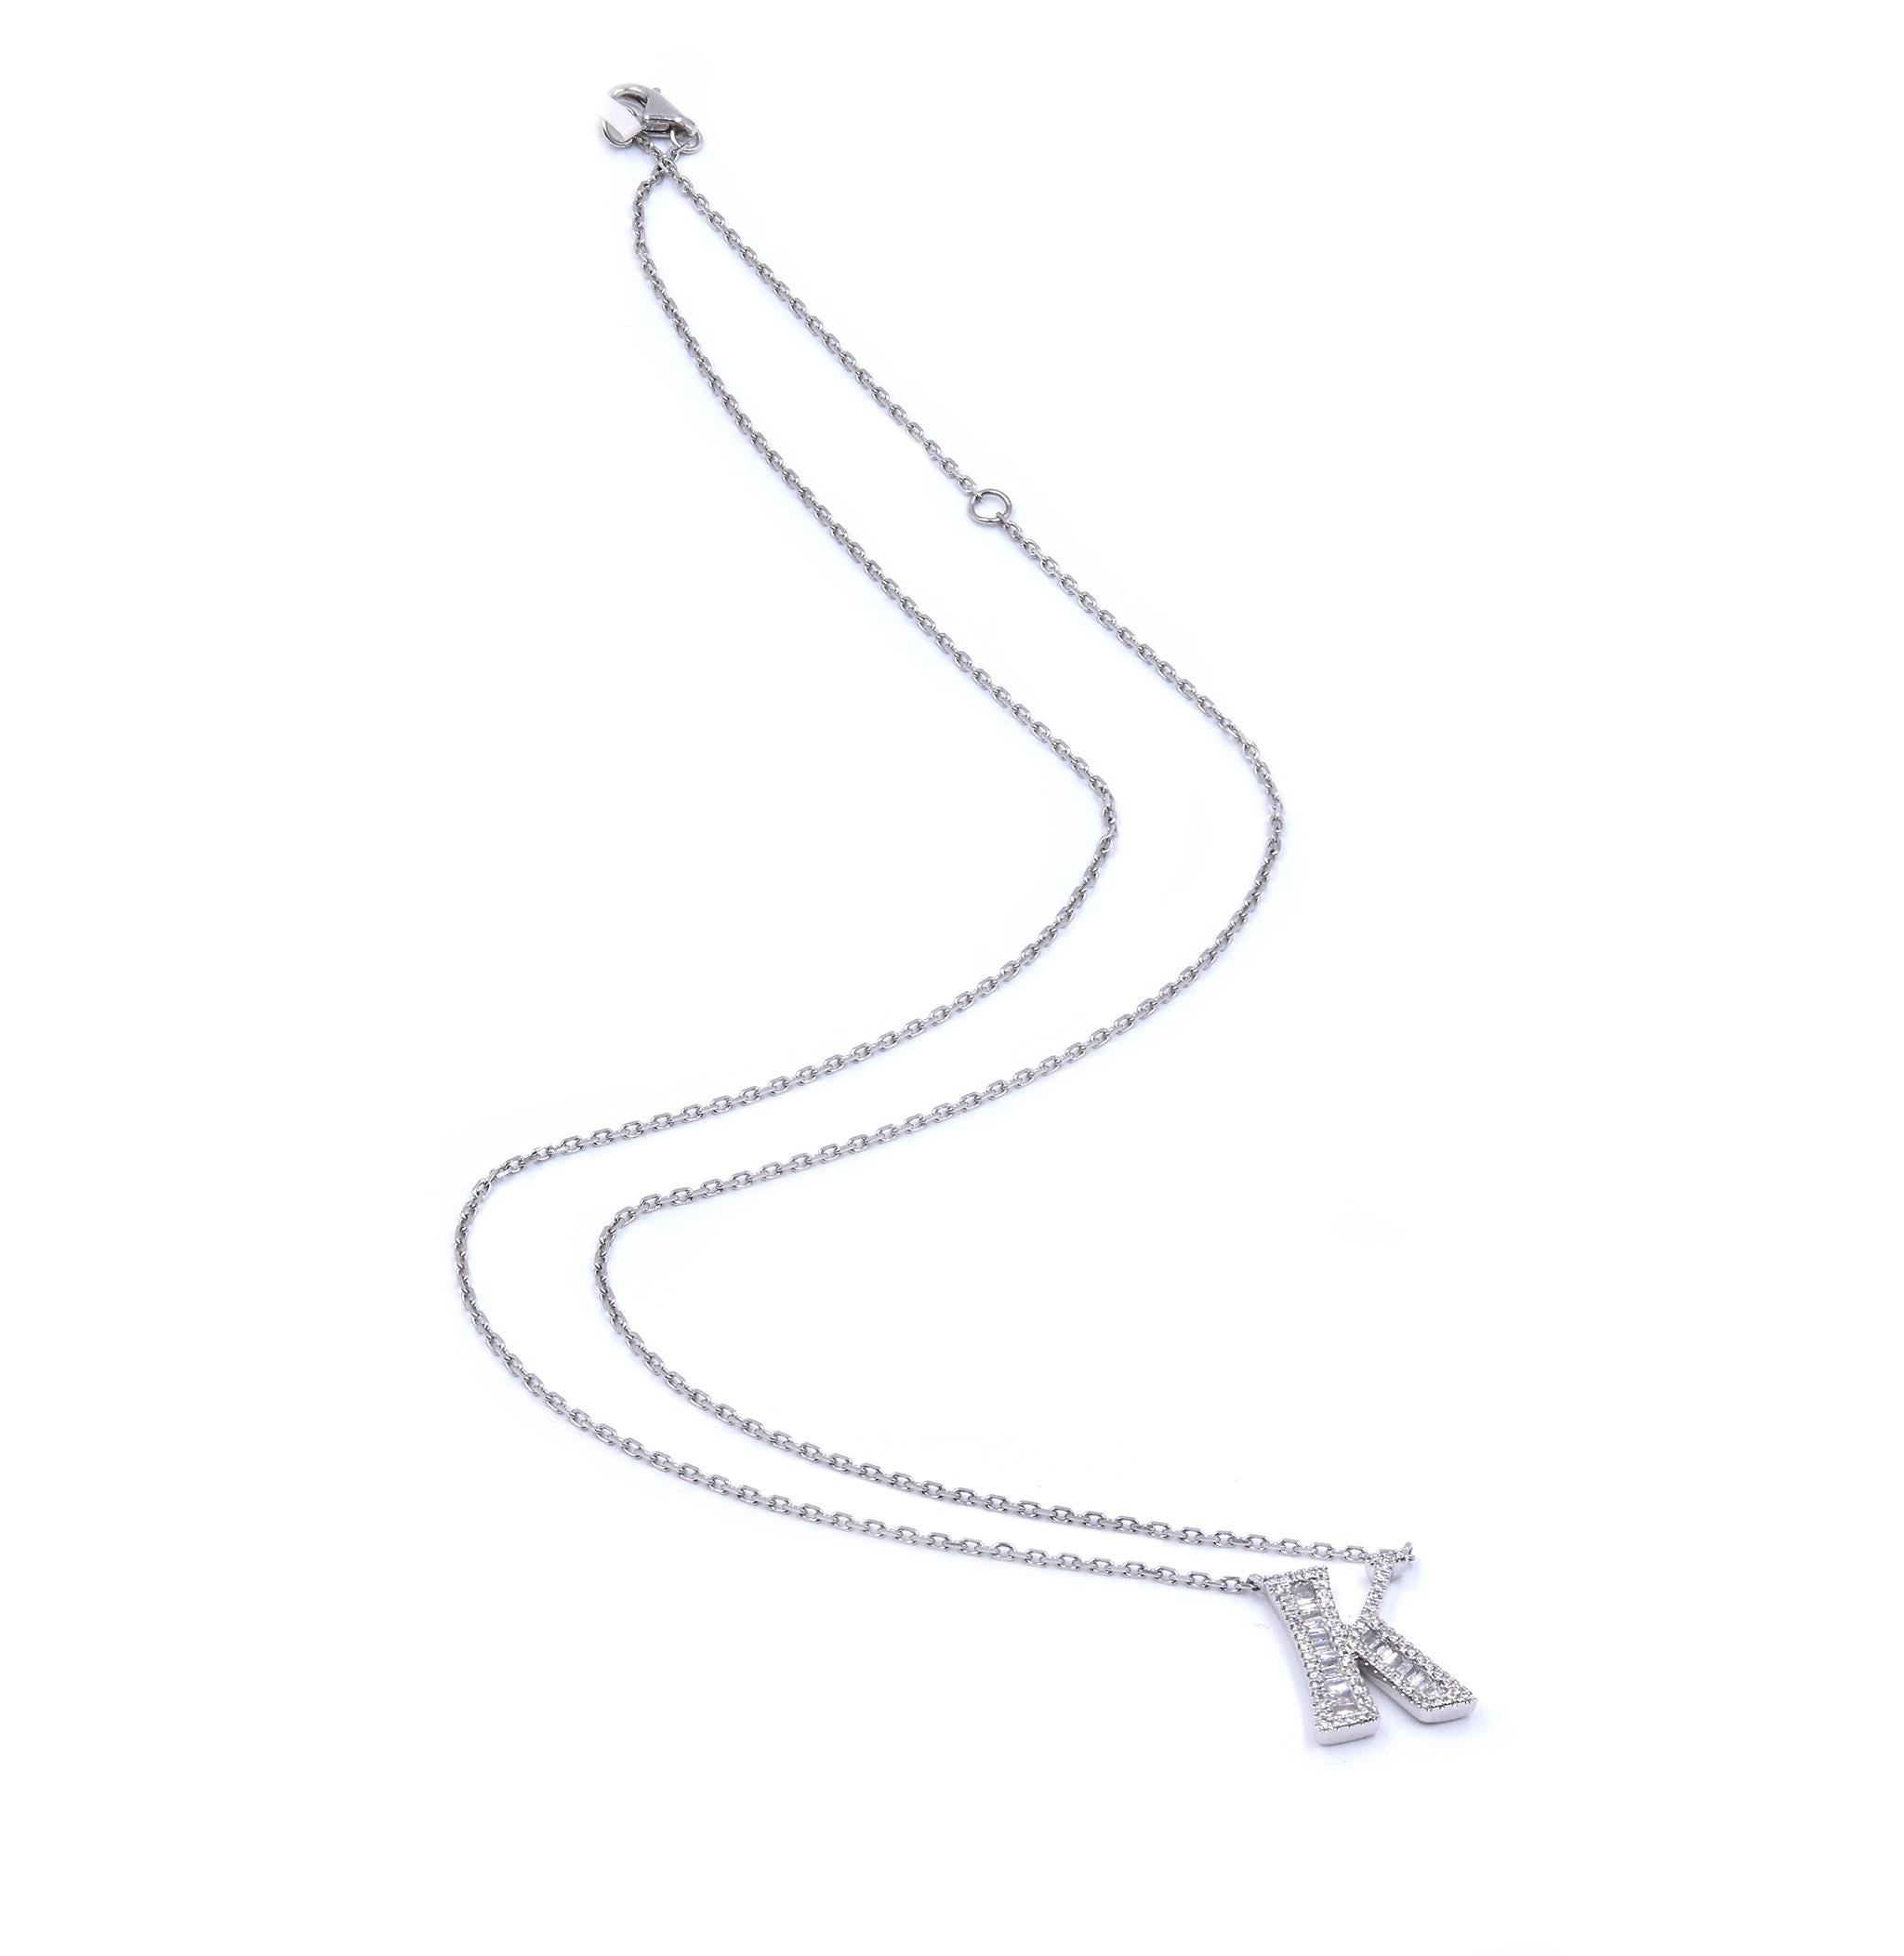 Designer: custom
Material: 18K white gold
Diamonds: 90 round and baguette cut = .29cttw
Color: H
Clarity: SI1
Dimensions: necklace measures 20-inches
Weight: 4.08 grams
